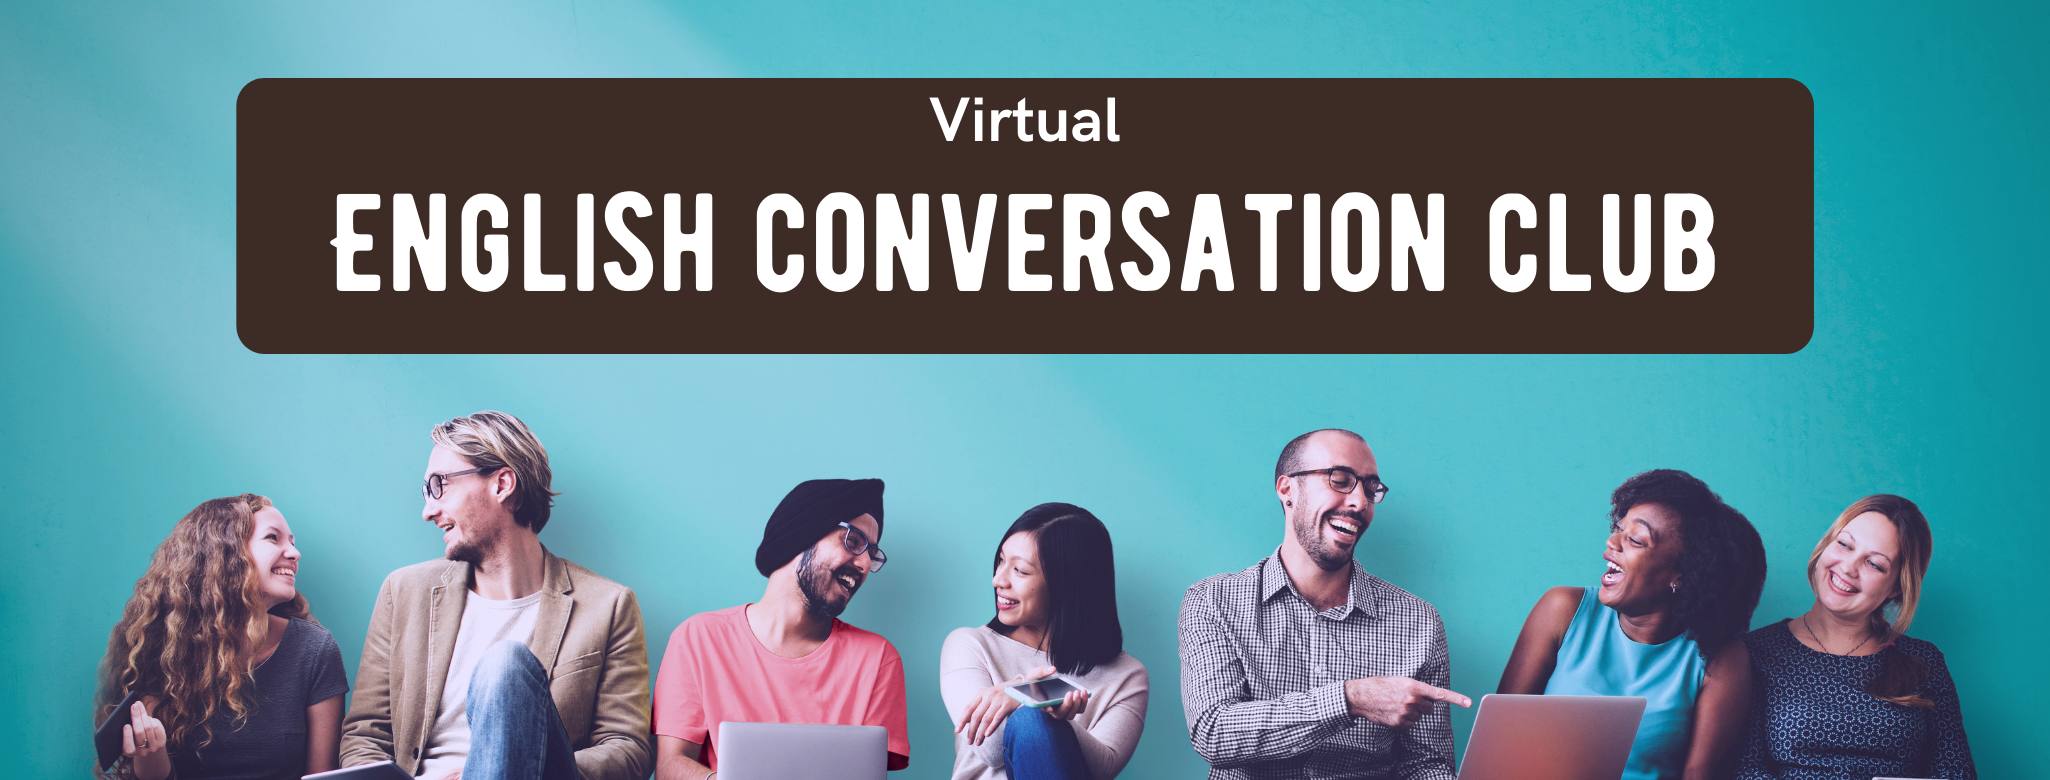 Text: English Conversation Club : A group of multicultural adults sit against a teal wall